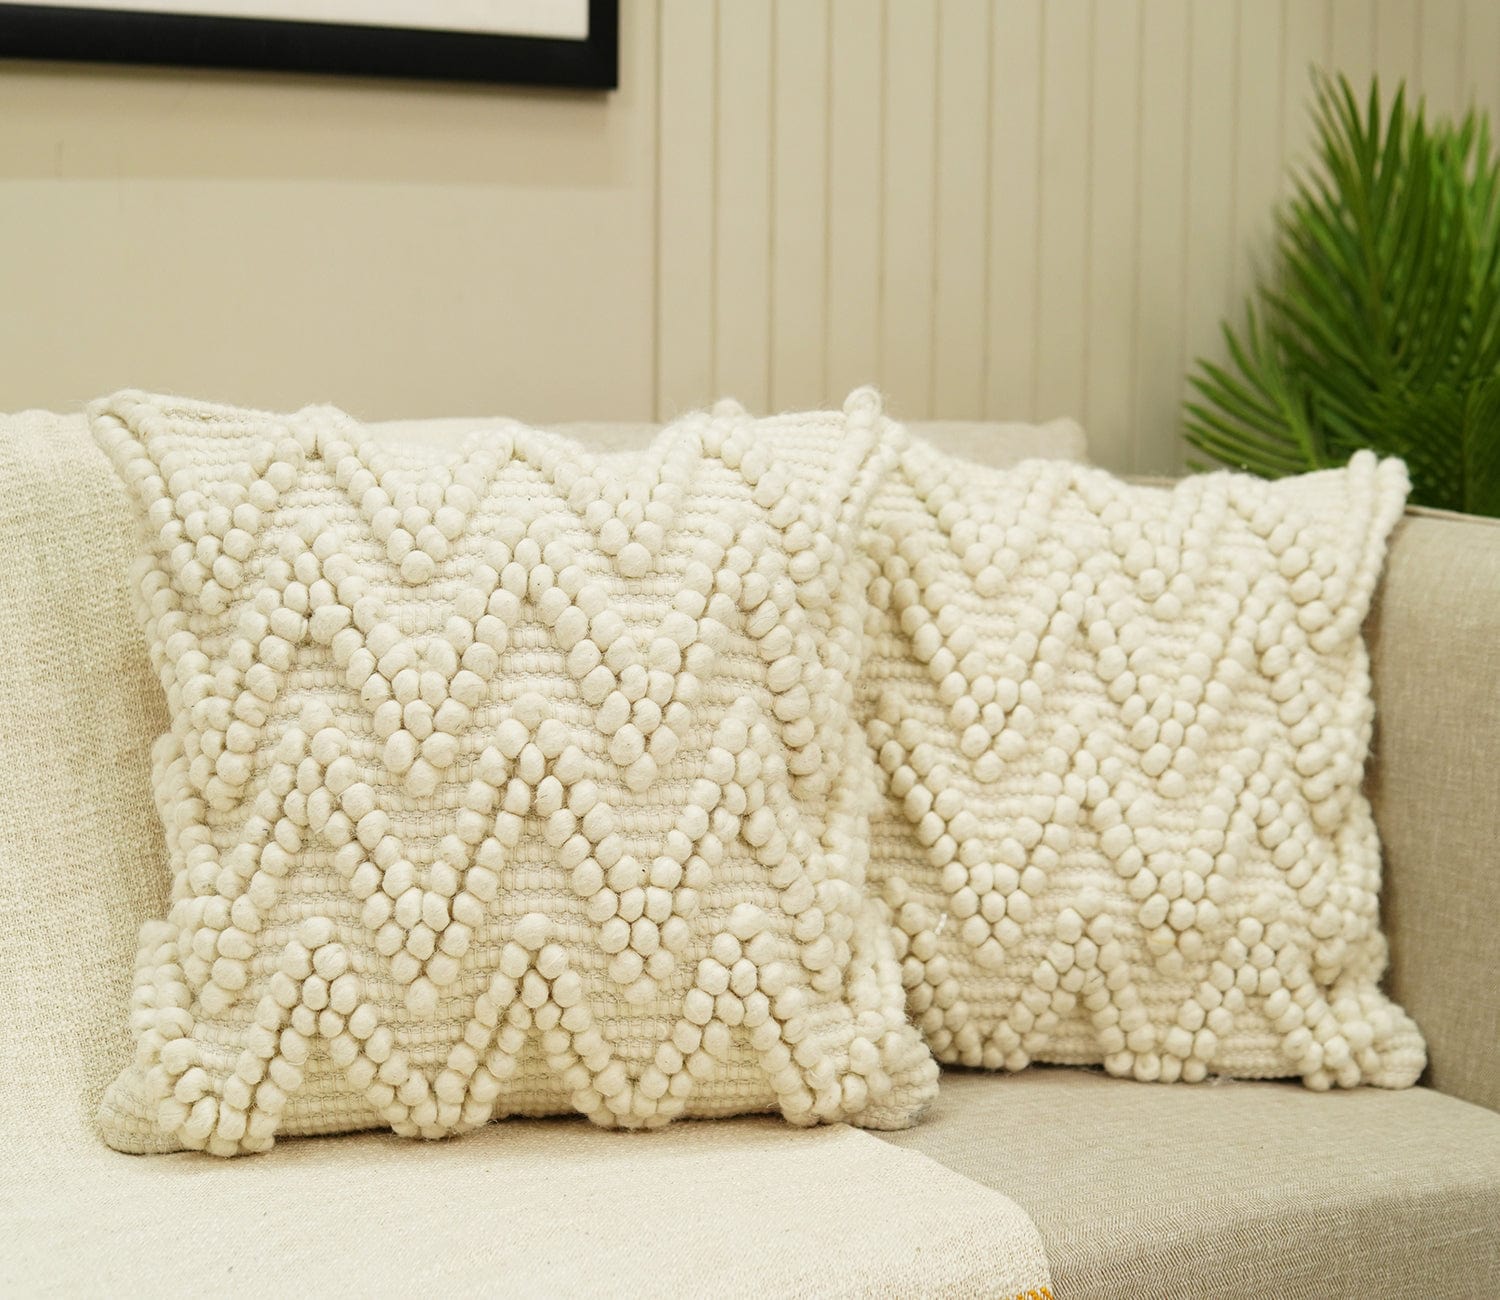 Hand Woven Ivory Color Linen Cushion Covers - Set of 2 (20 x 20 inch)